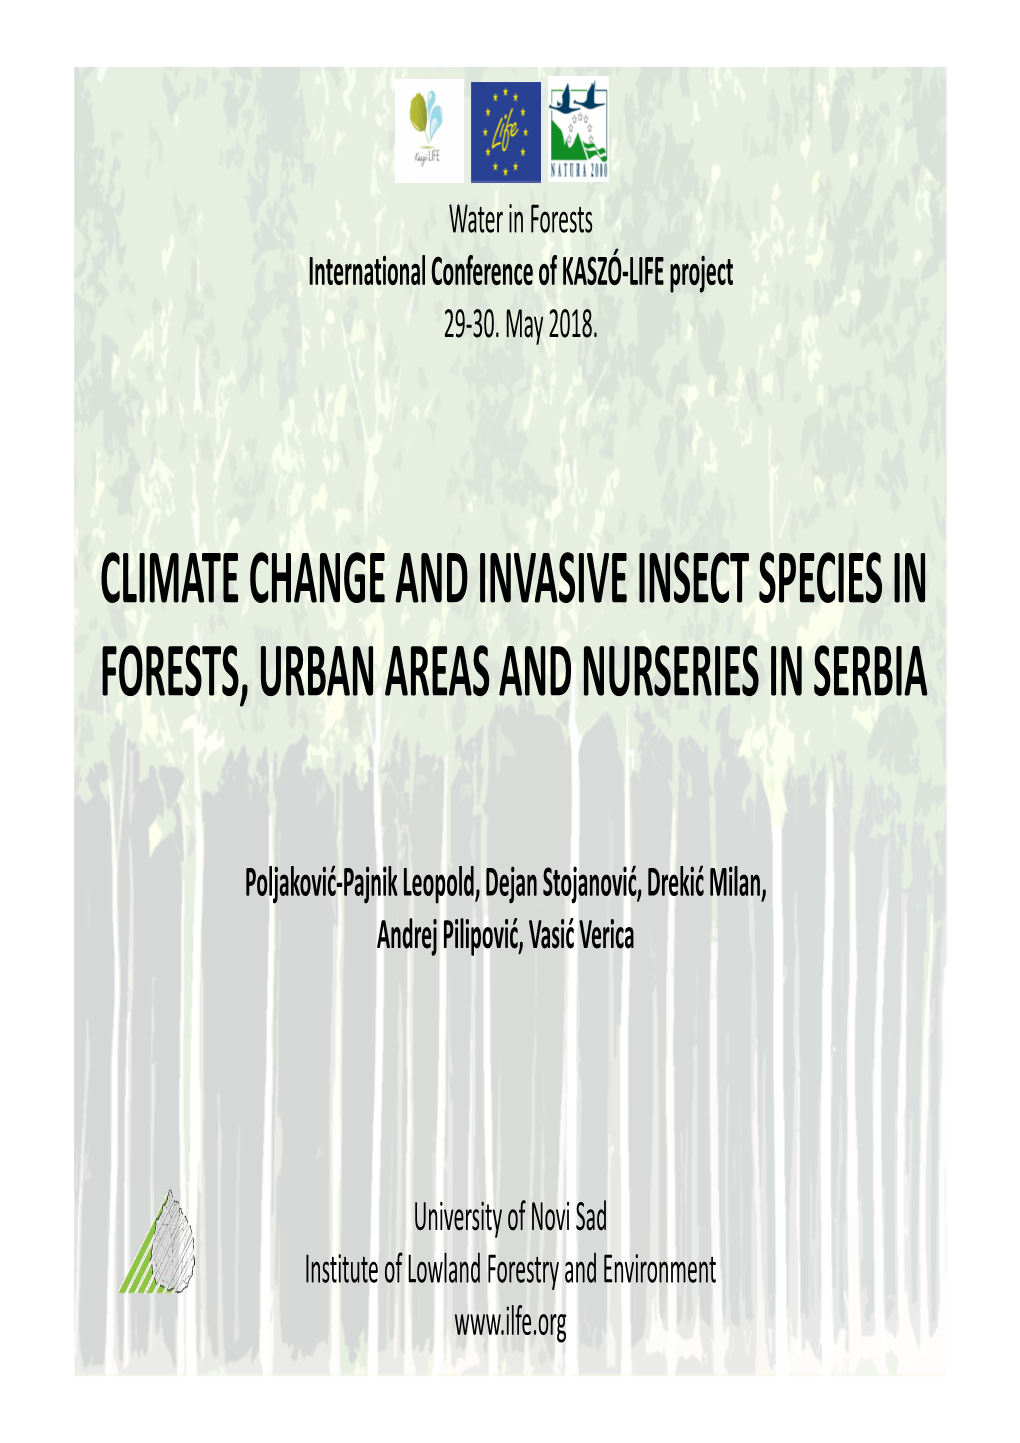 Climate Change and Invasive Insect Species in Forests, Urban Areas and Nurseries in Serbia